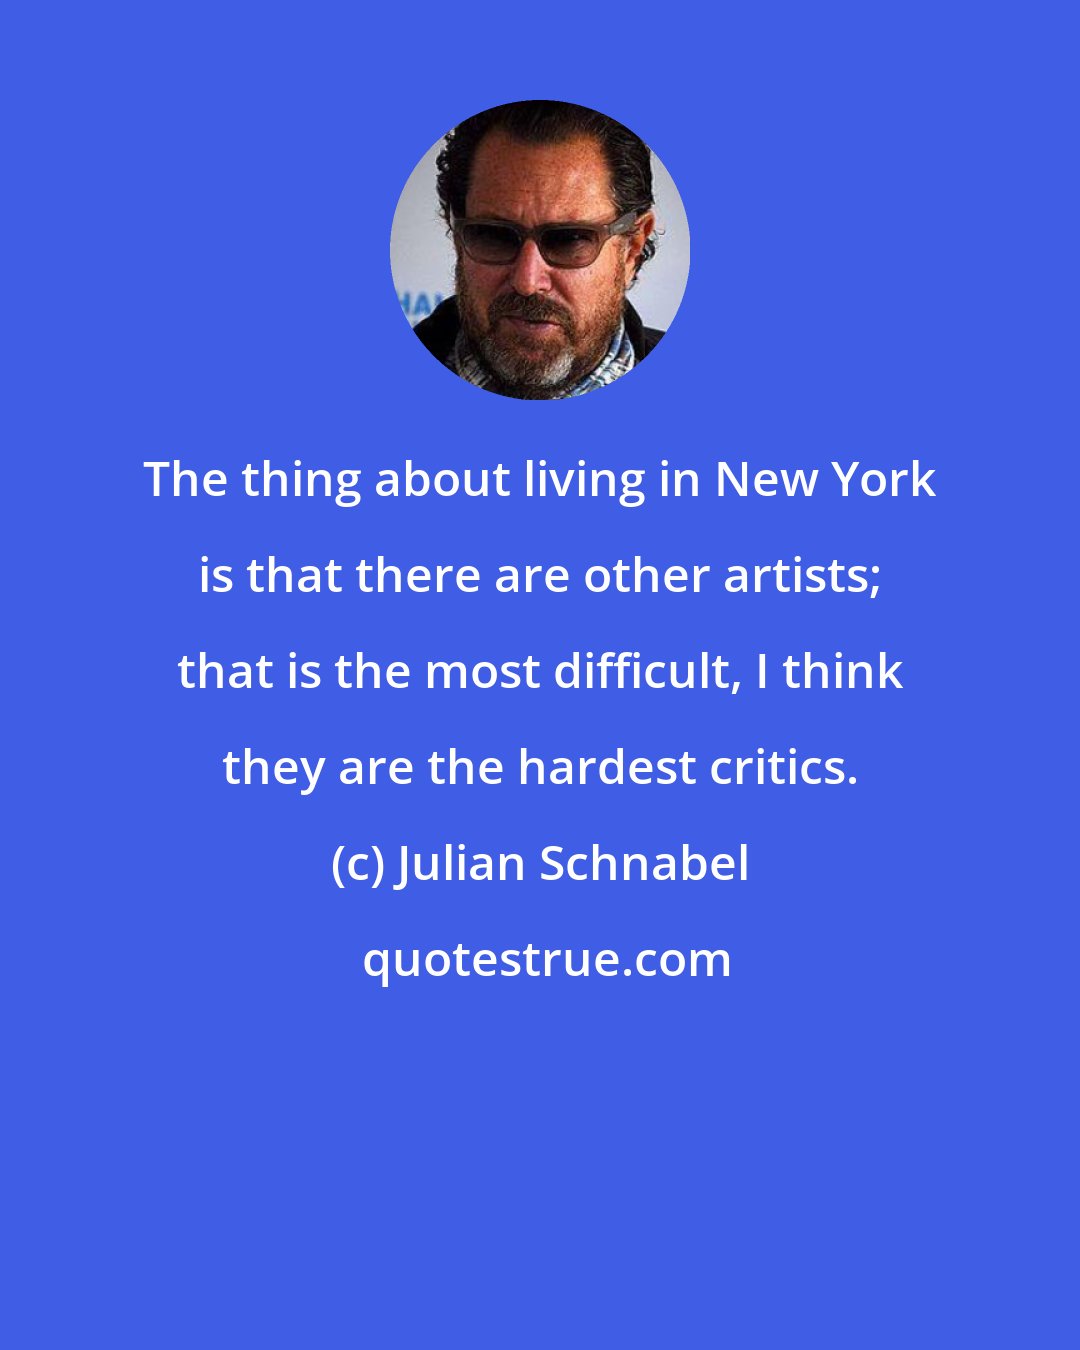 Julian Schnabel: The thing about living in New York is that there are other artists; that is the most difficult, I think they are the hardest critics.